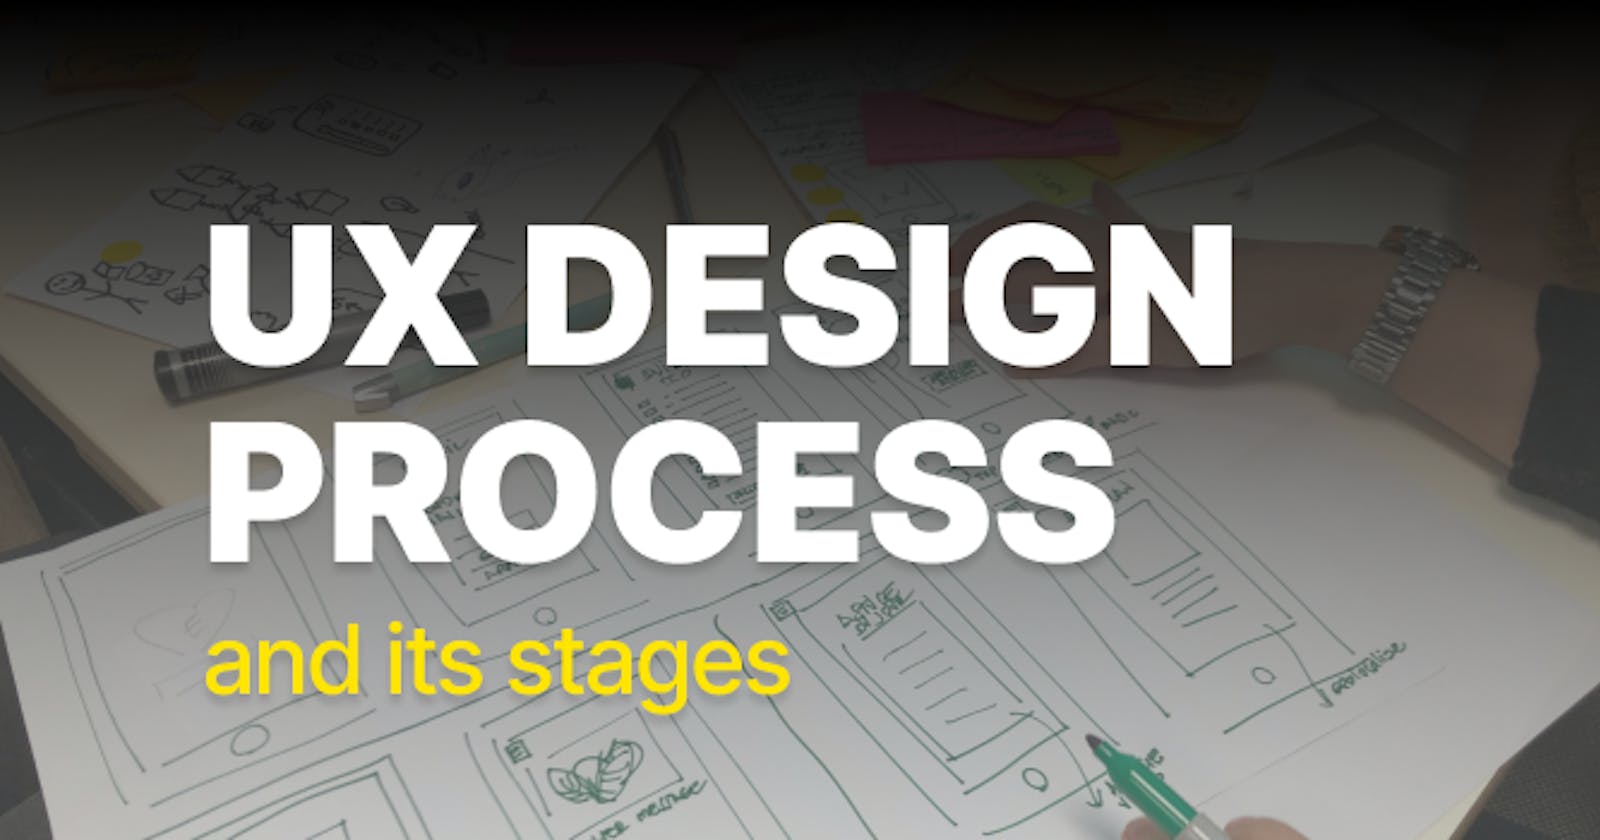 “The Power of UX Design: A Journey Through Its Vital Stages”